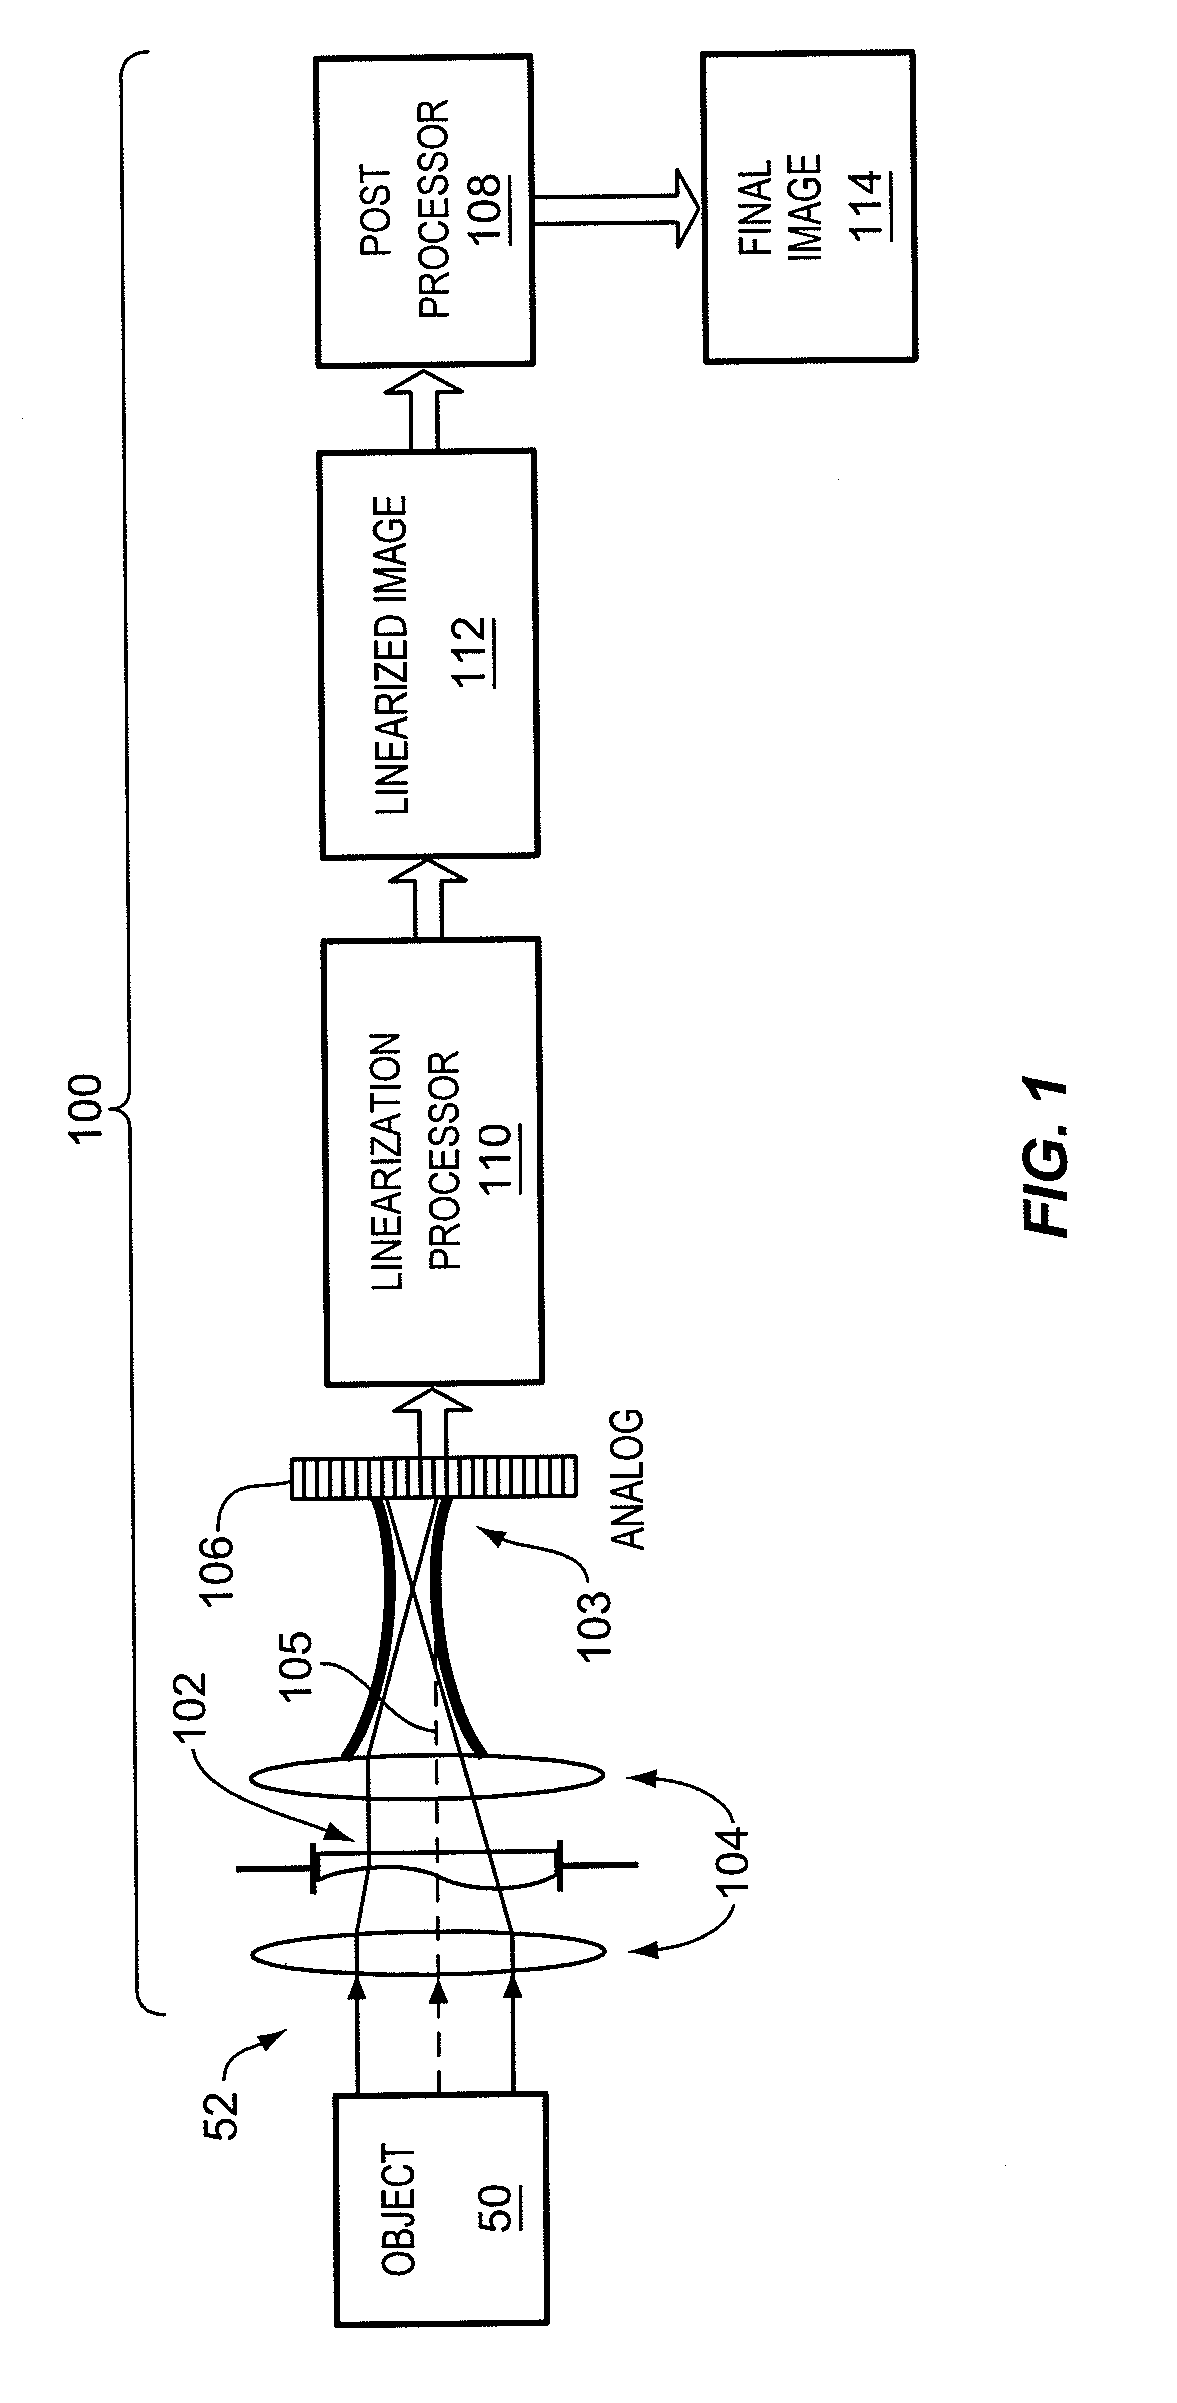 Non-linear wavefront coding systems and methods